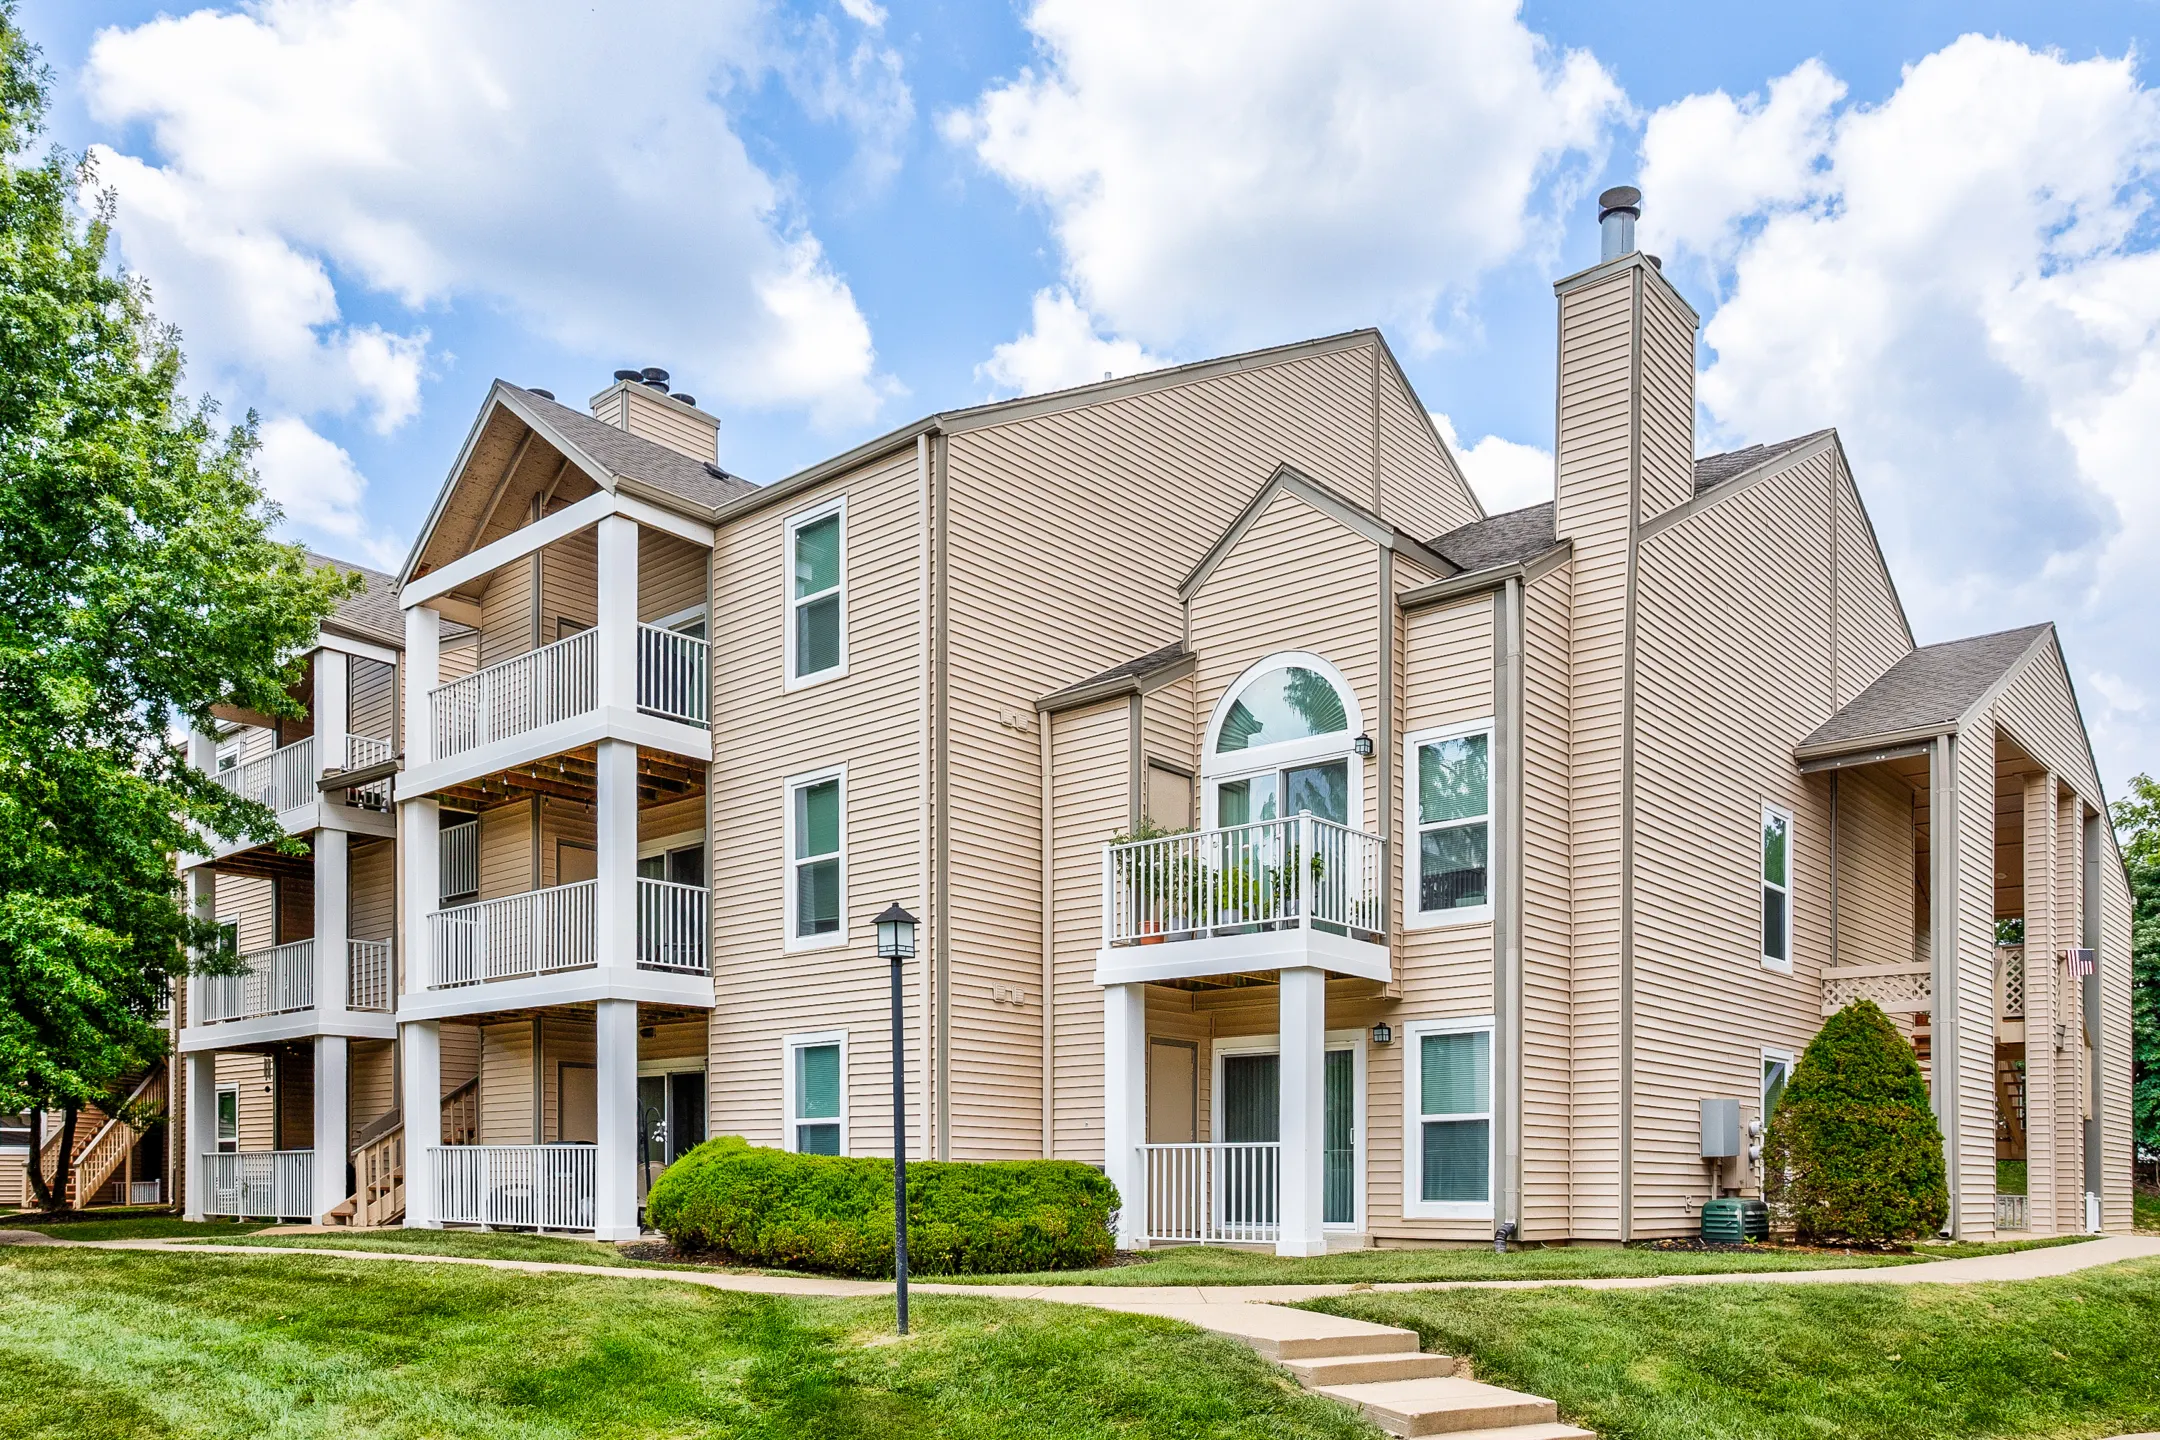 Building - Baxter Crossings - Chesterfield, MO